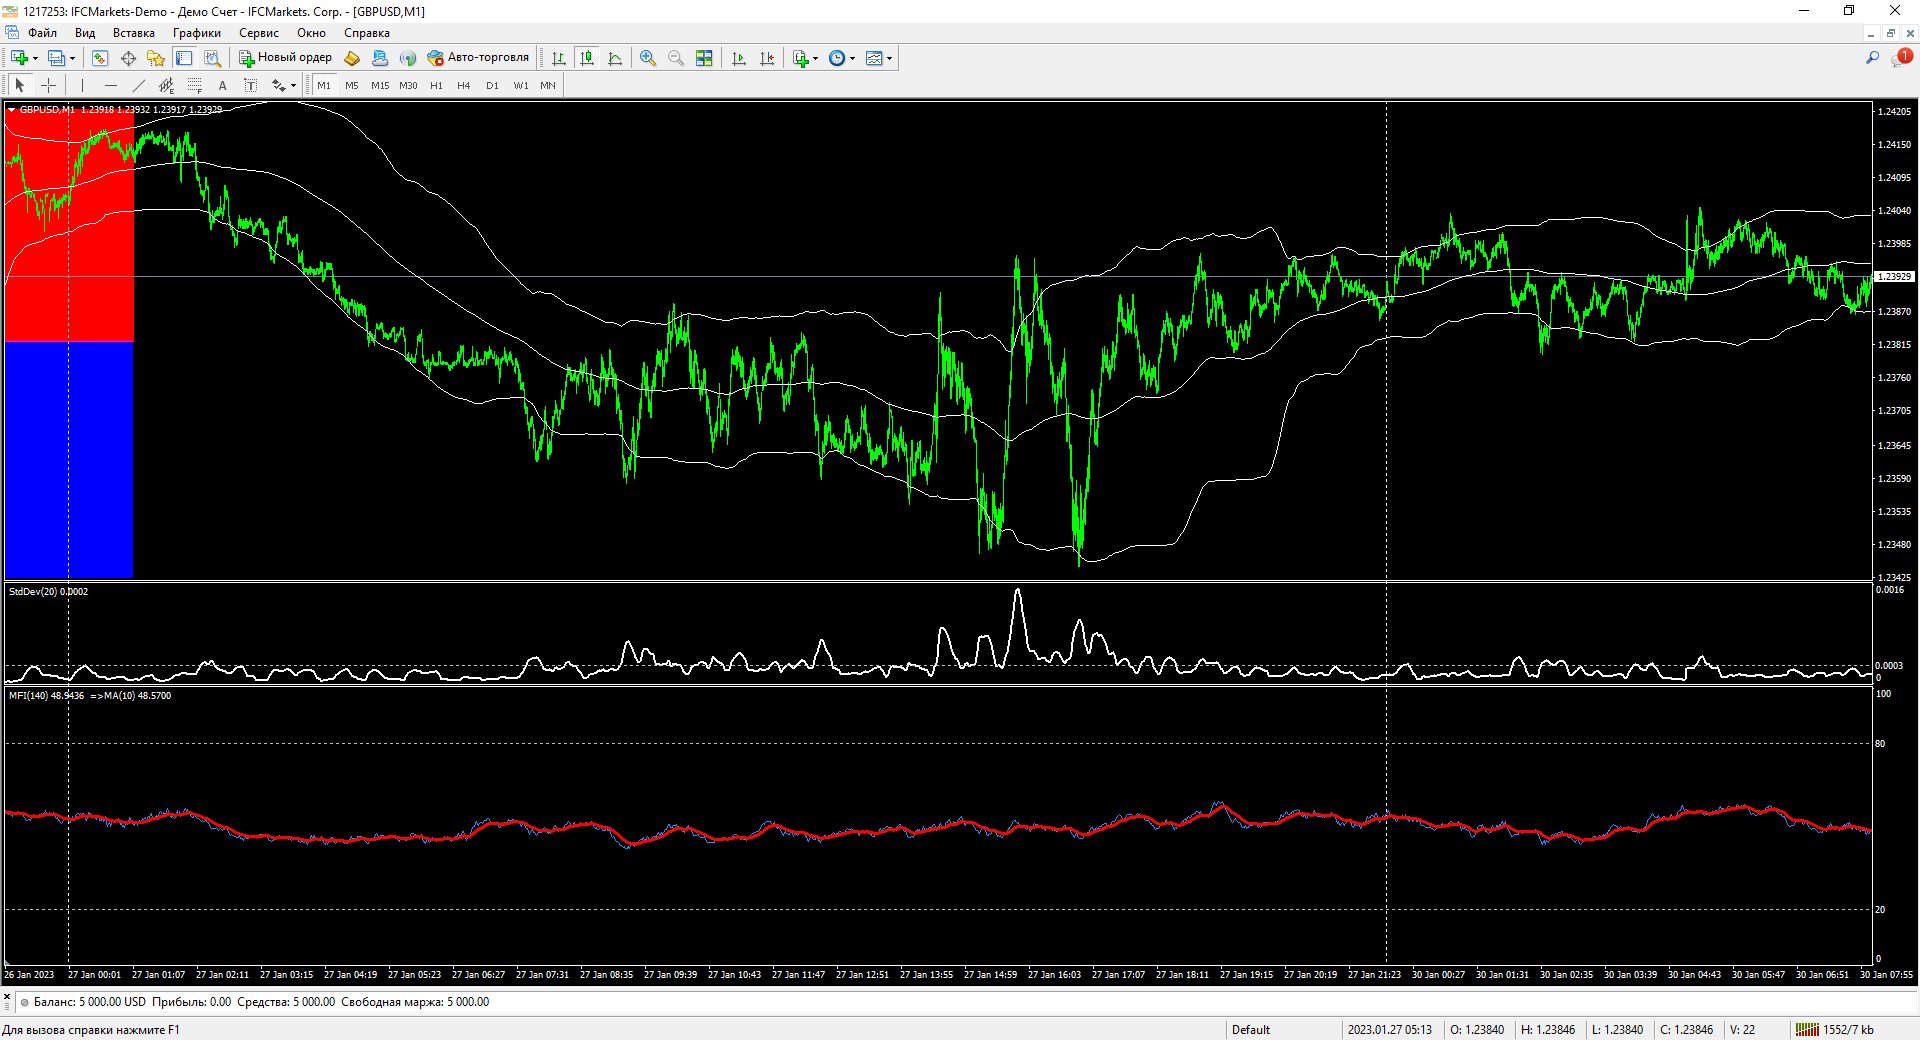 gbpusd-m1-ifcmarkets-corp-2.png